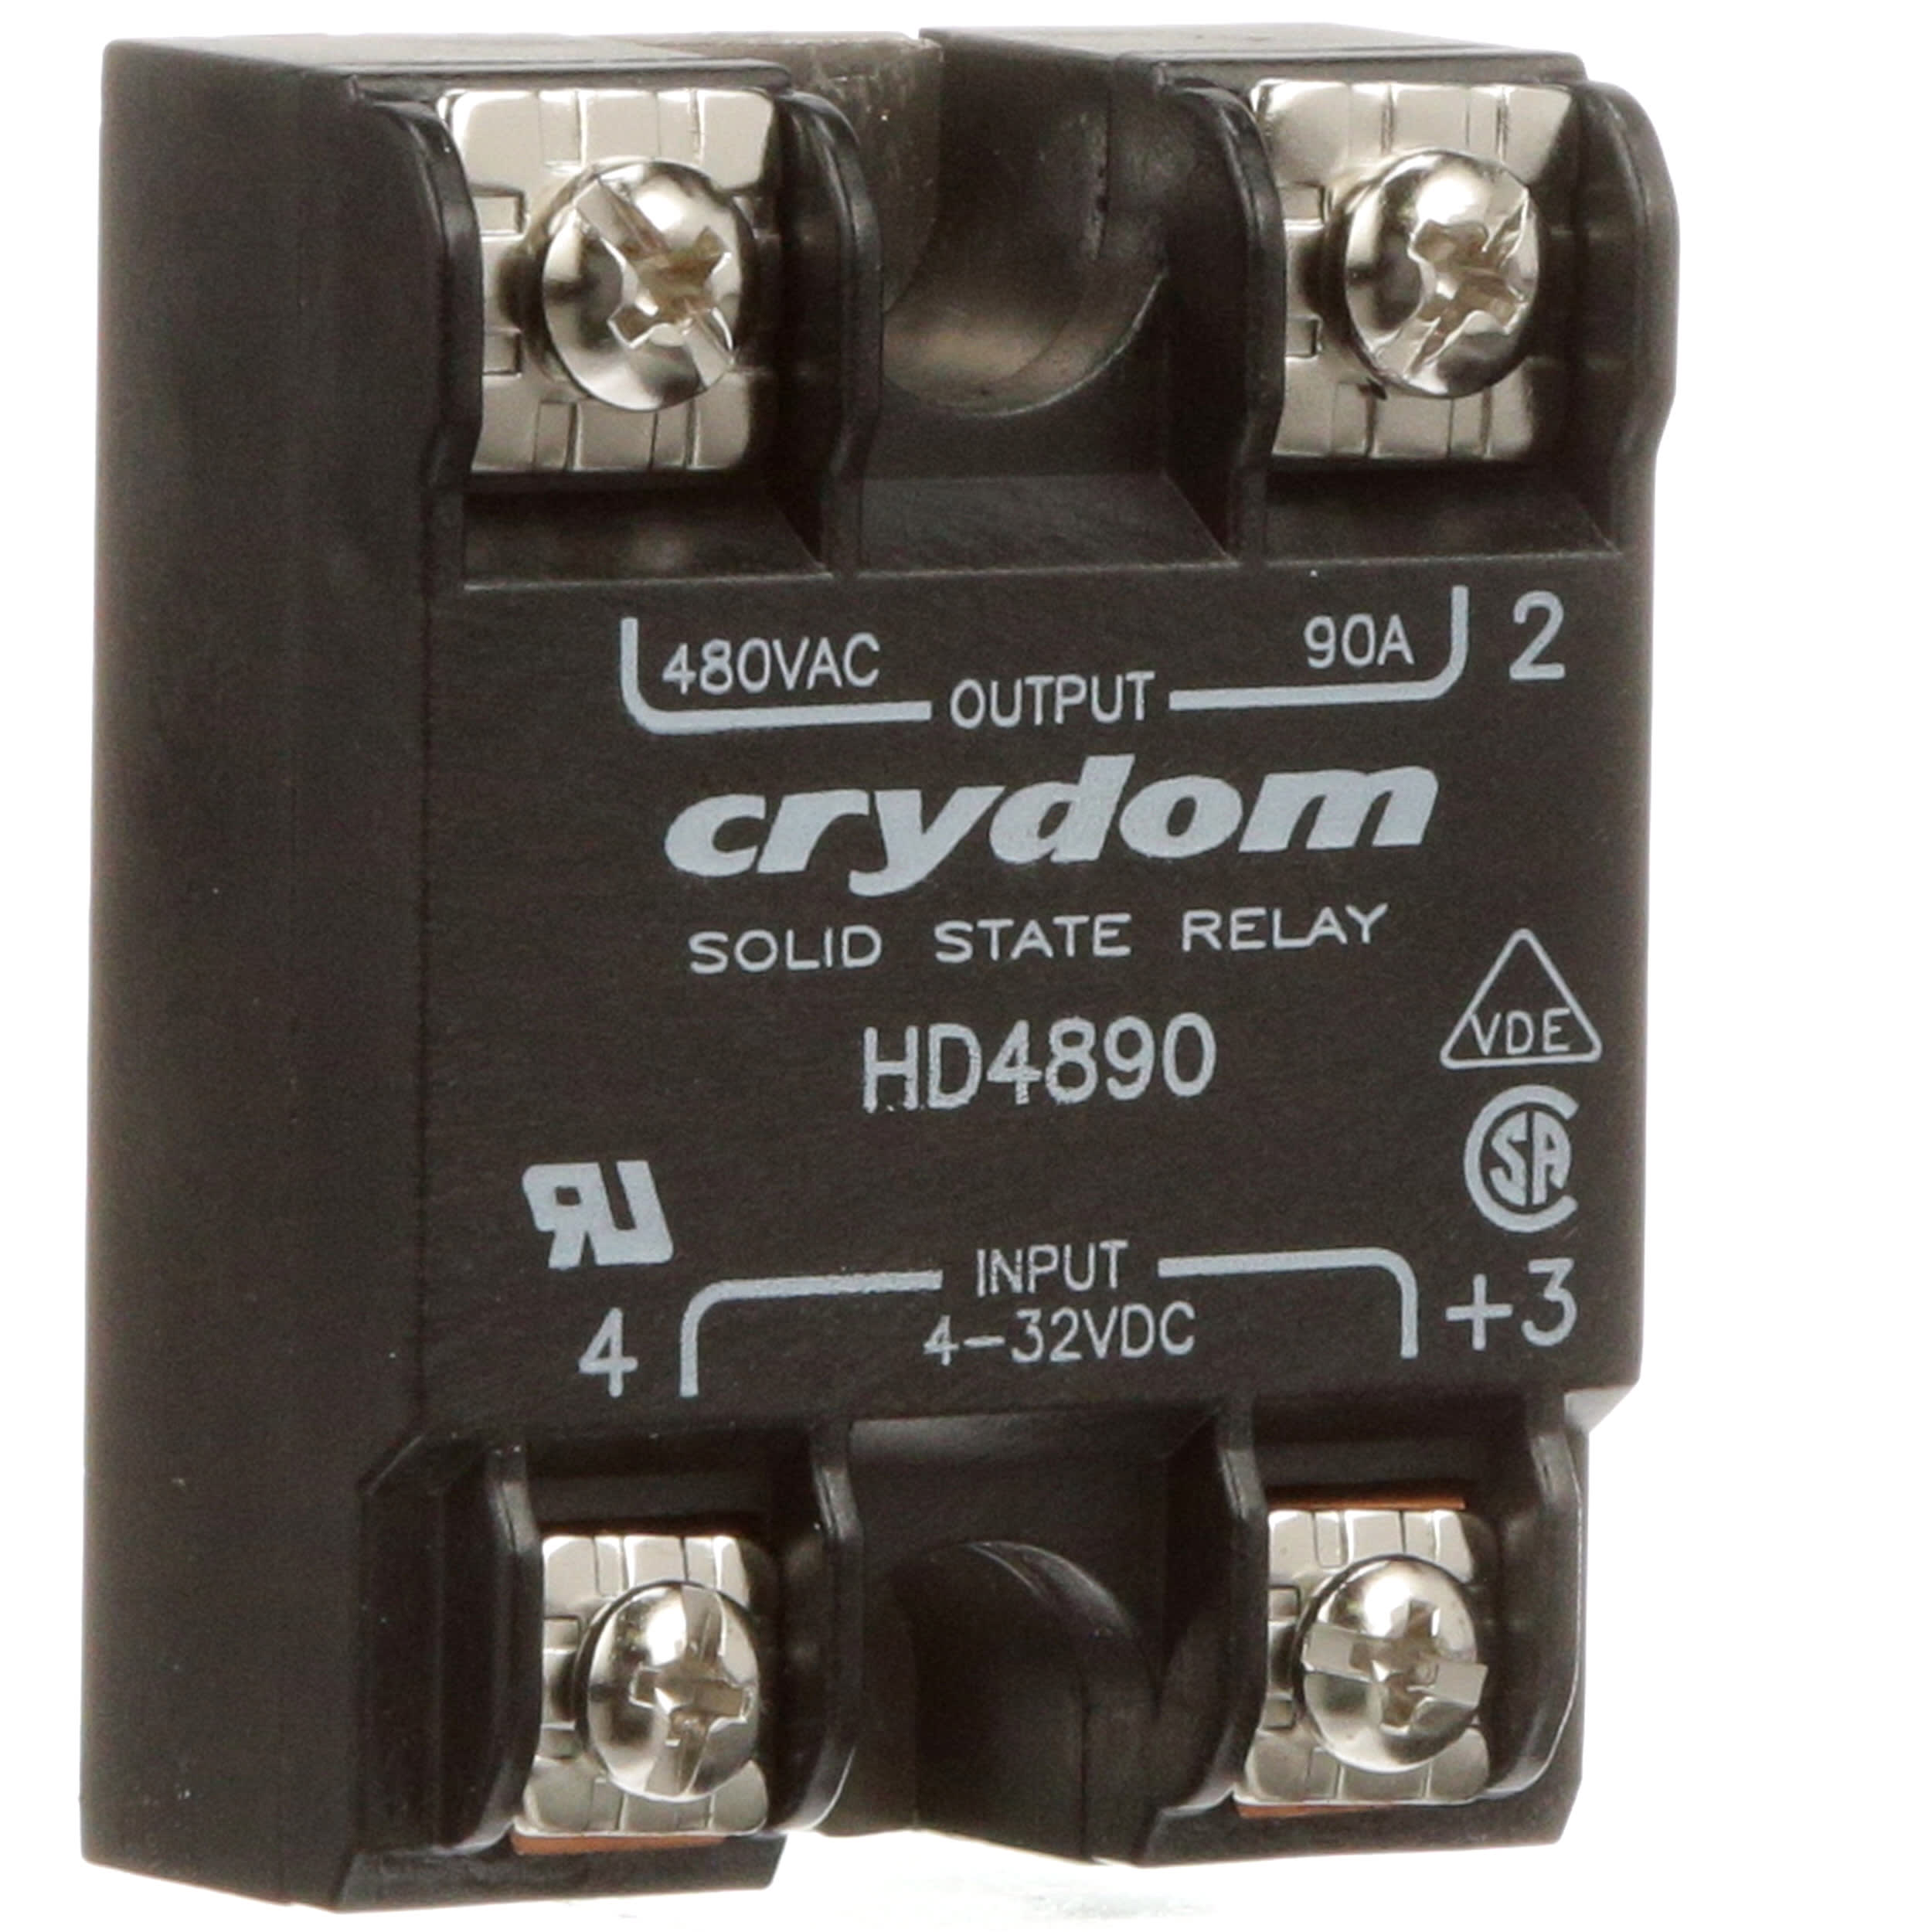 CRYDOM HD4890 Solid State Relay,Input 4-32VDC,Output,480VAC 90A 